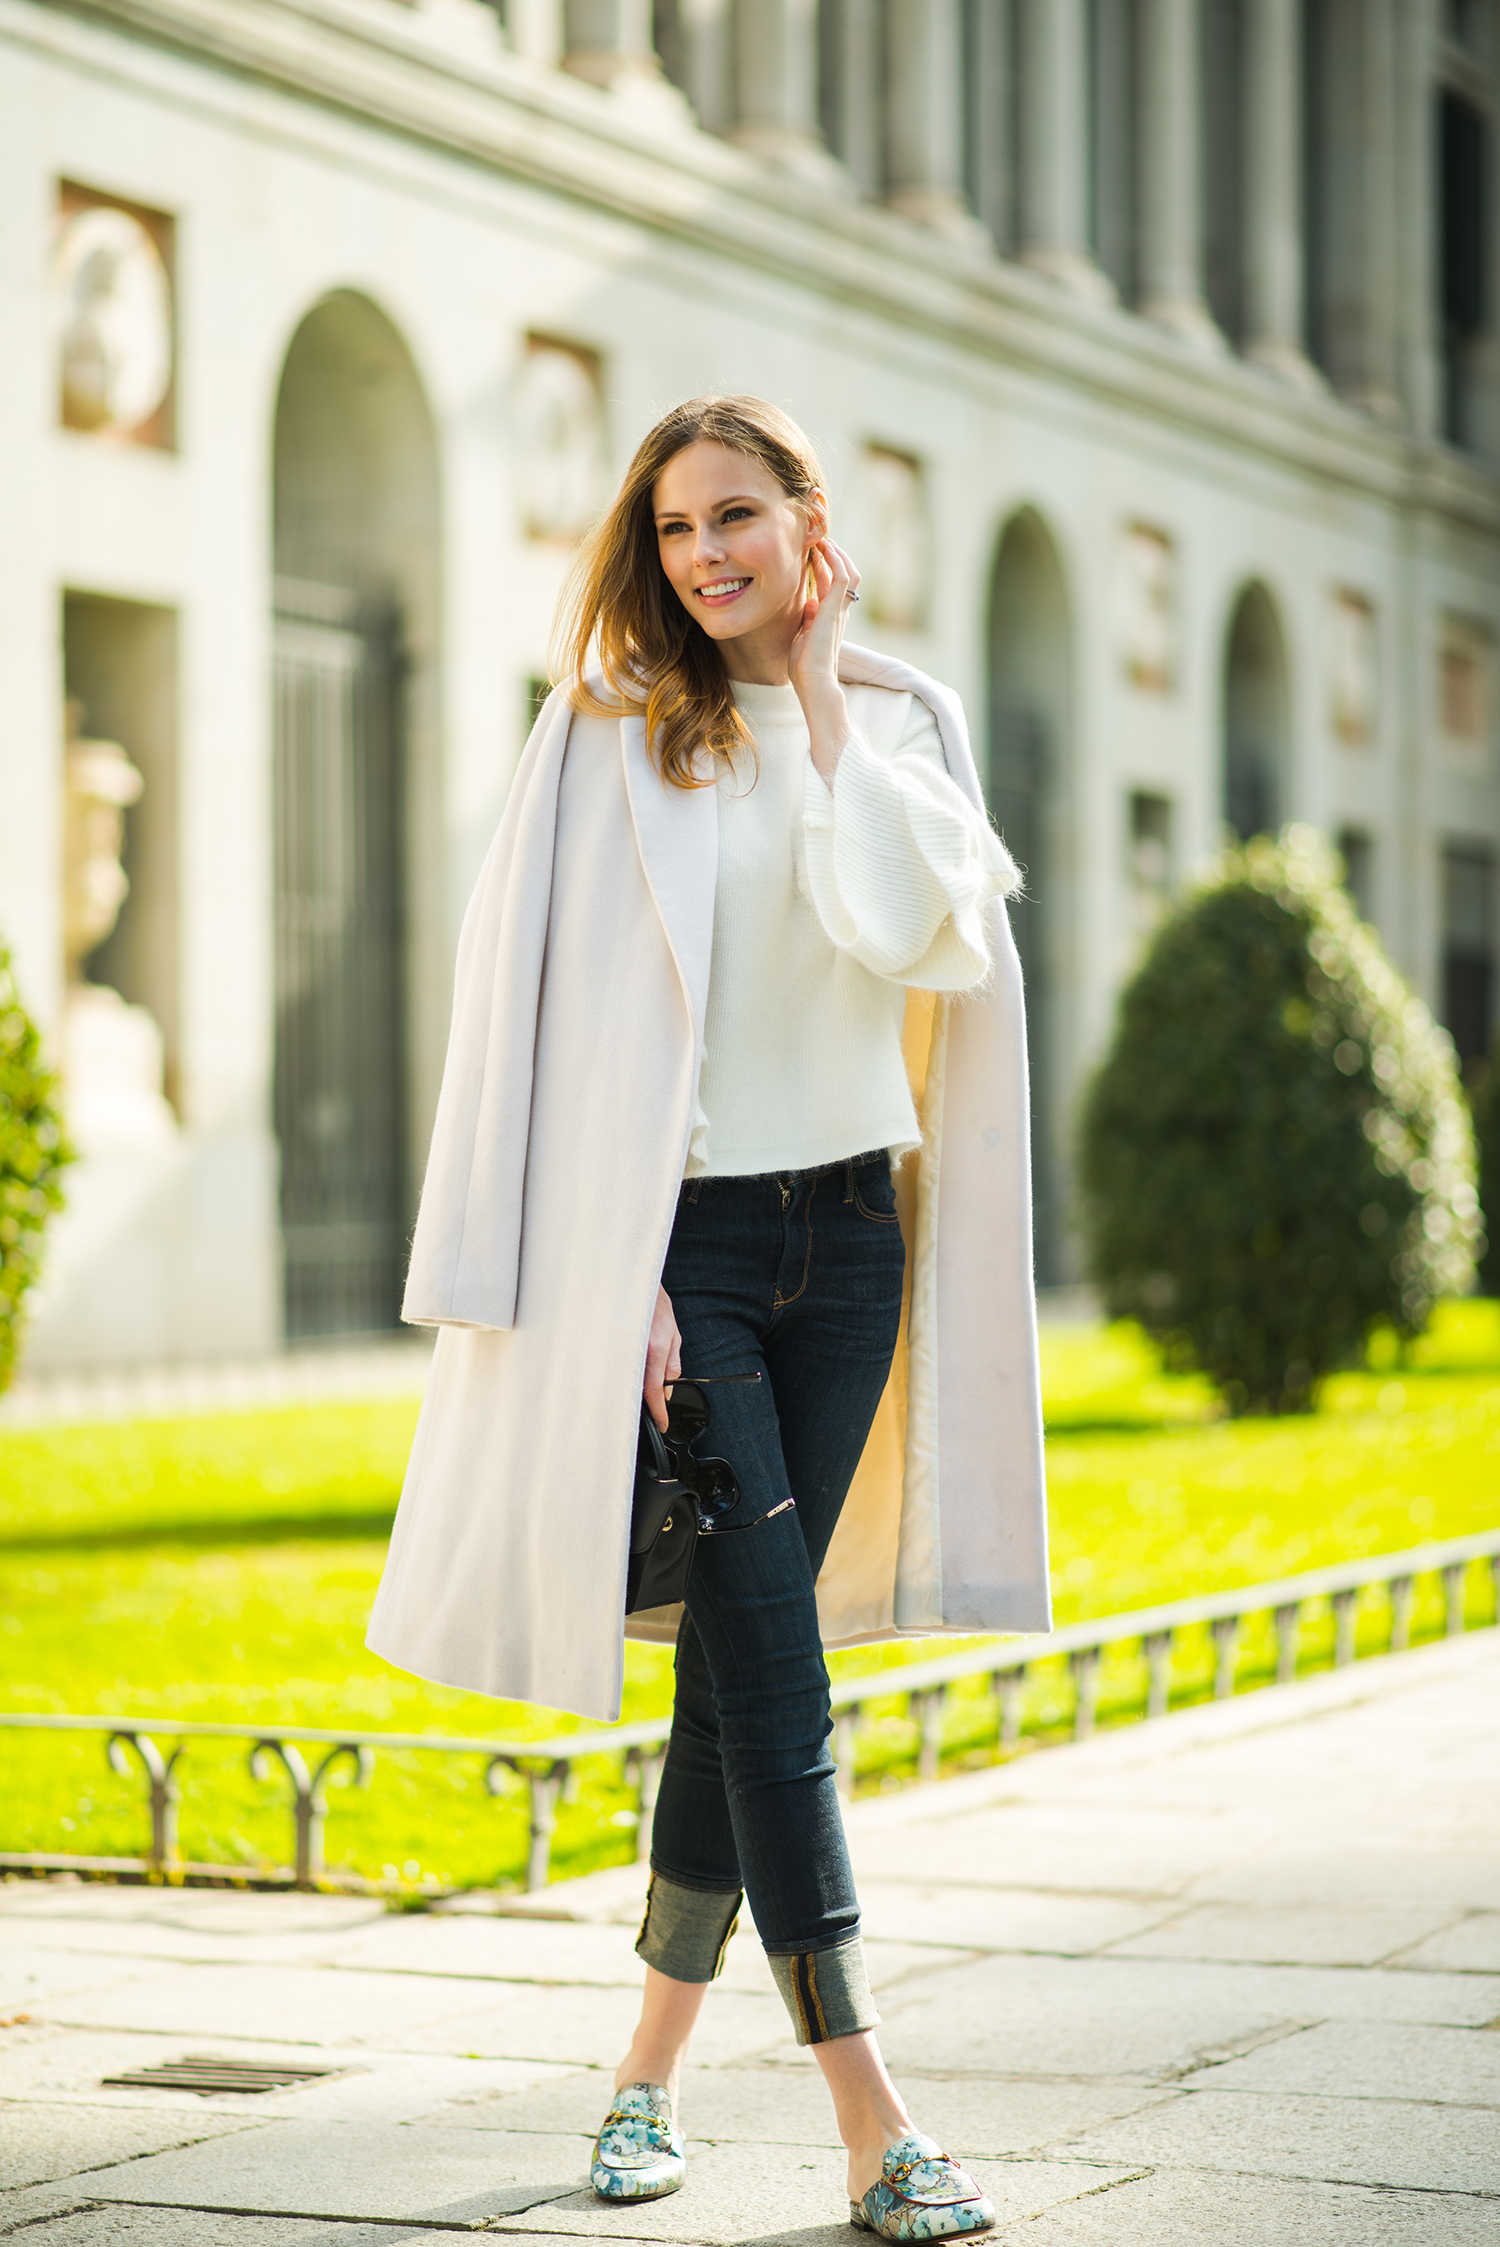 Miss USA 2011 Alyssa Campanella of The A List blog wearing Gucci Princetown shoes in Madrid, Spain